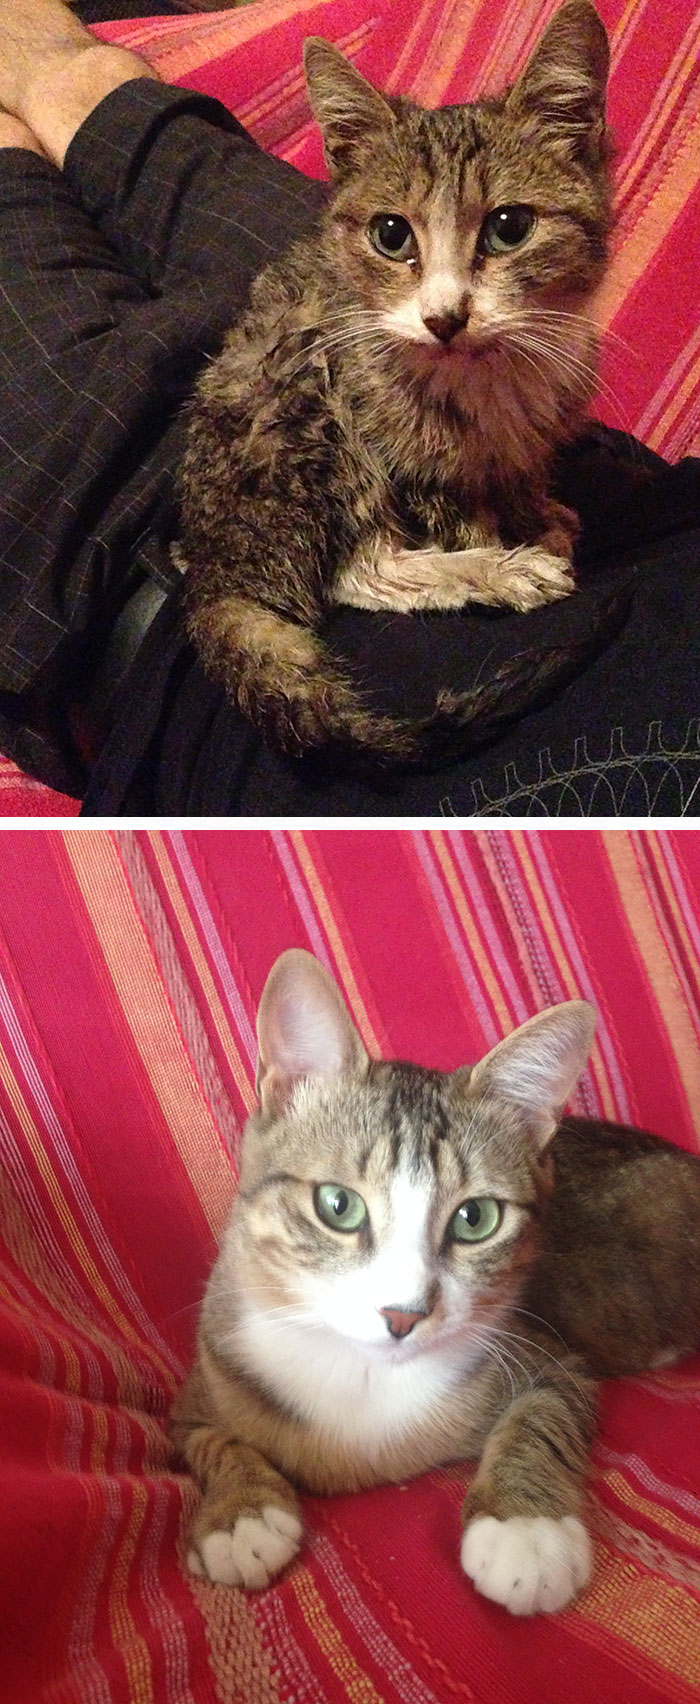 Tommy Had Been Poisoned, But He Was Found On The Street And Slowly Became Better